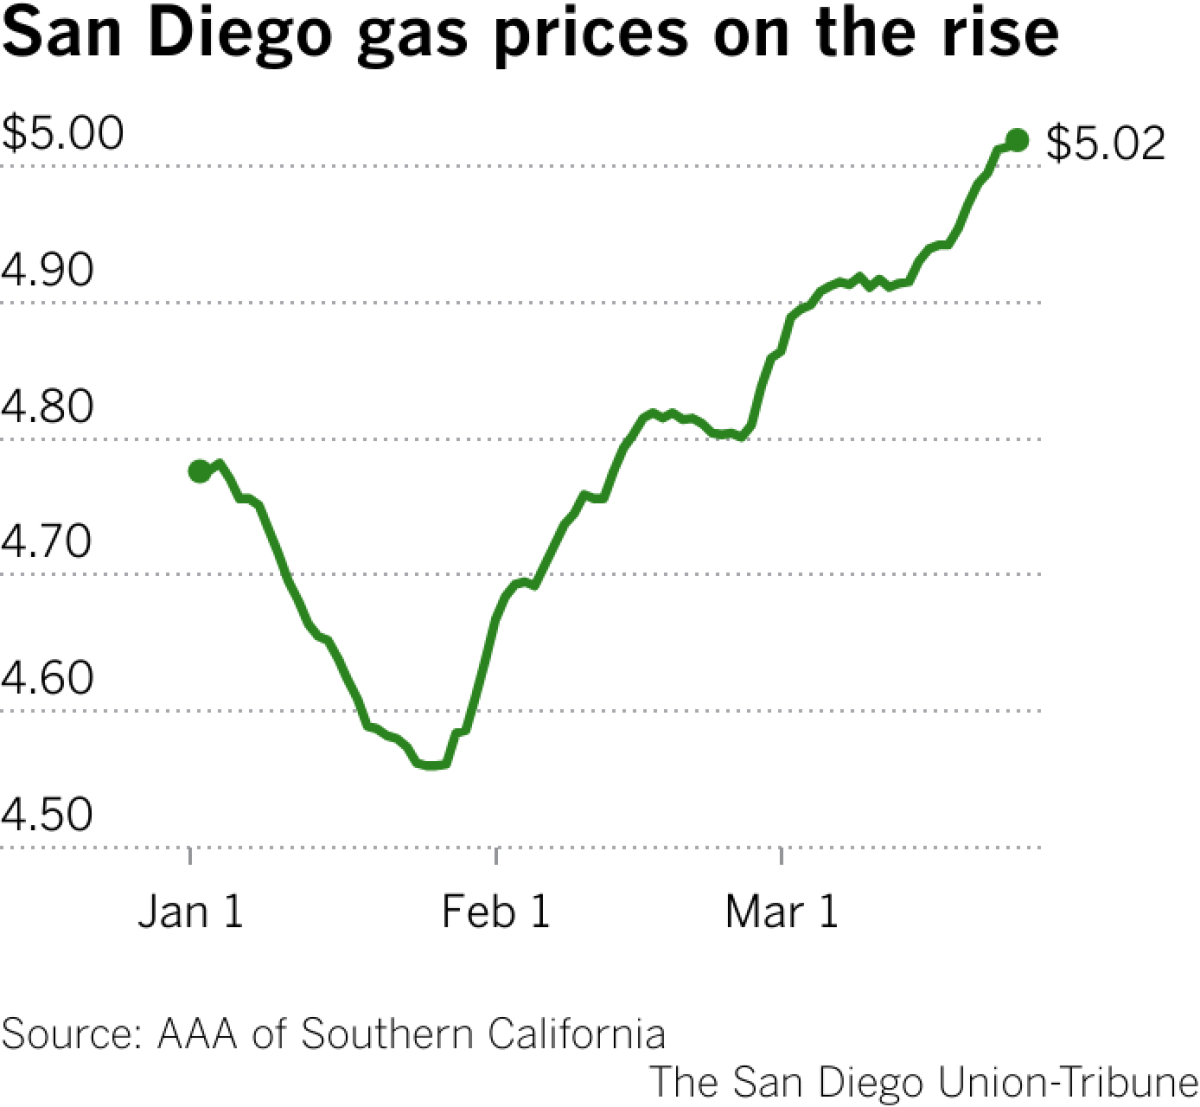 San Diego gas prices on the rise